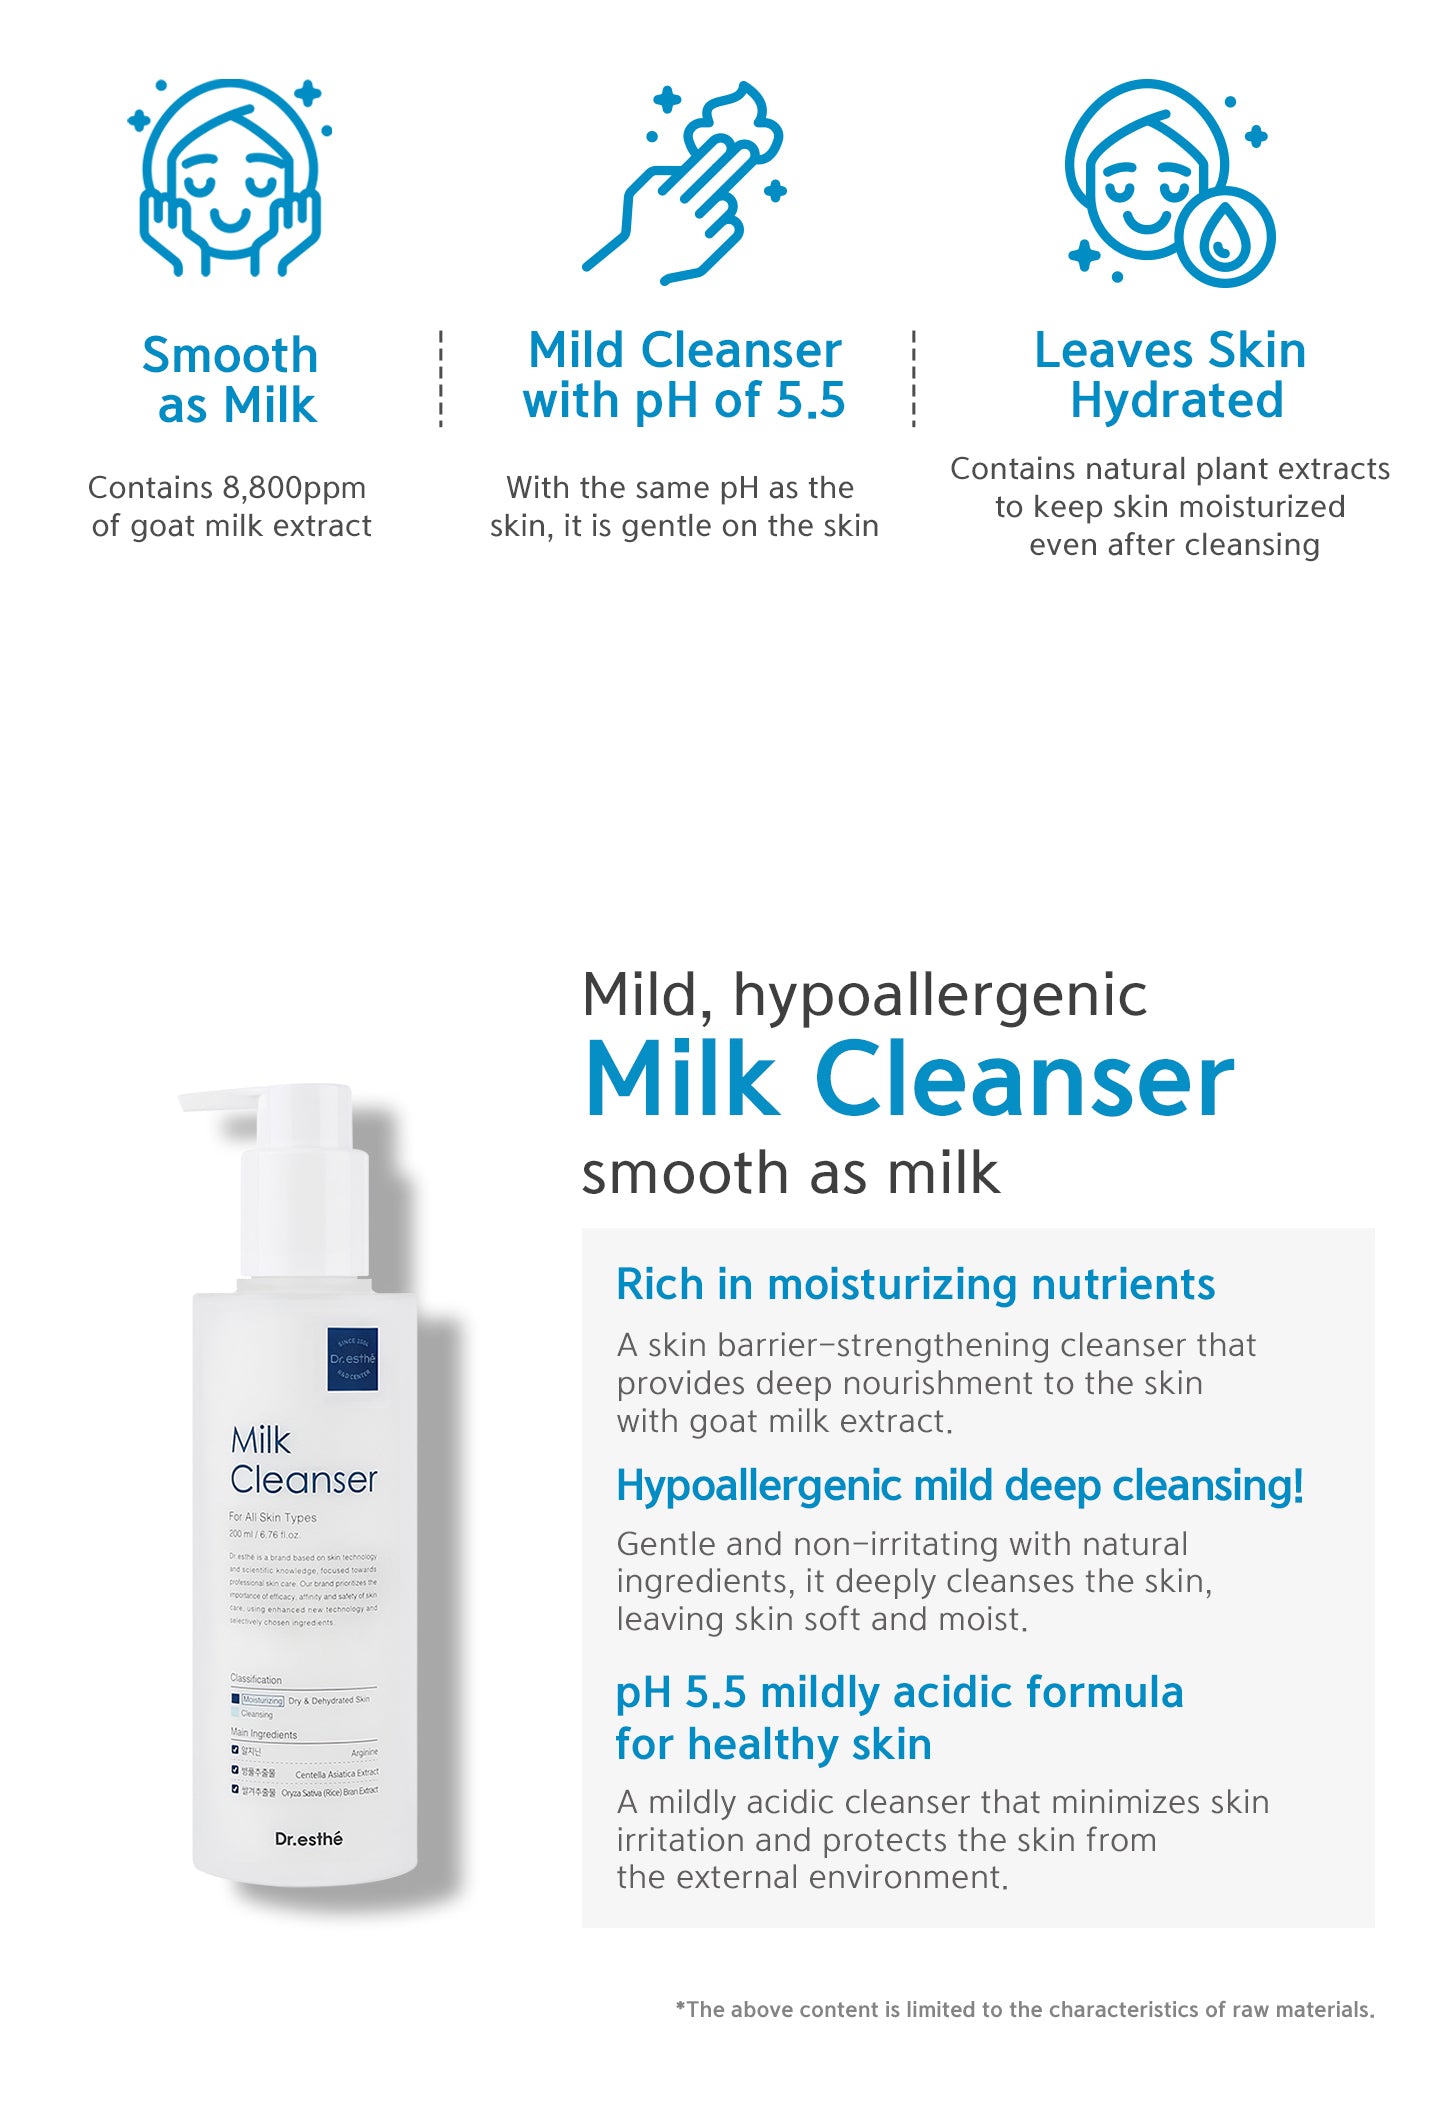 Rich in moisturizing nutrients, hypoallergenic mild deep cleansing! pH 5.5 mildly acidic formula for healthy skin. Smooth as milk contains 8800 ppm of goat milk extract. Contains natural plant extracts to keep skin moisturized even after cleansing. 